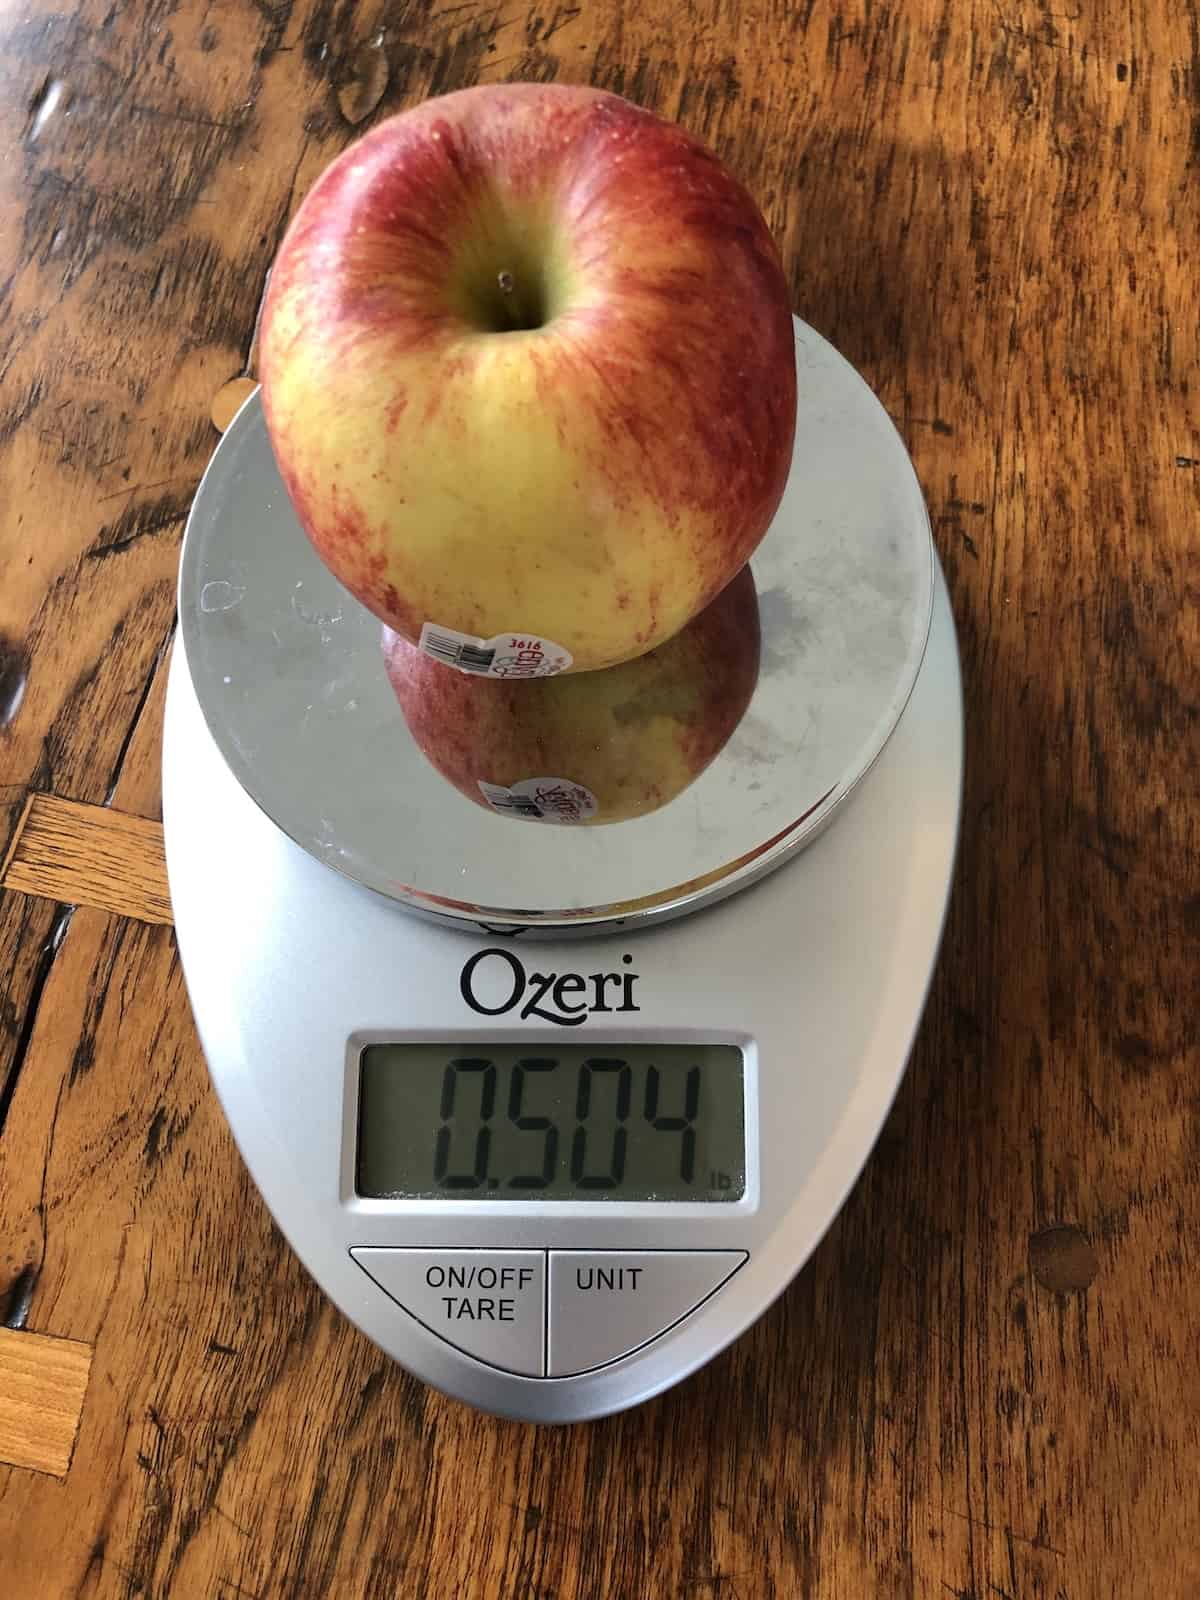 Weight of an envy apple